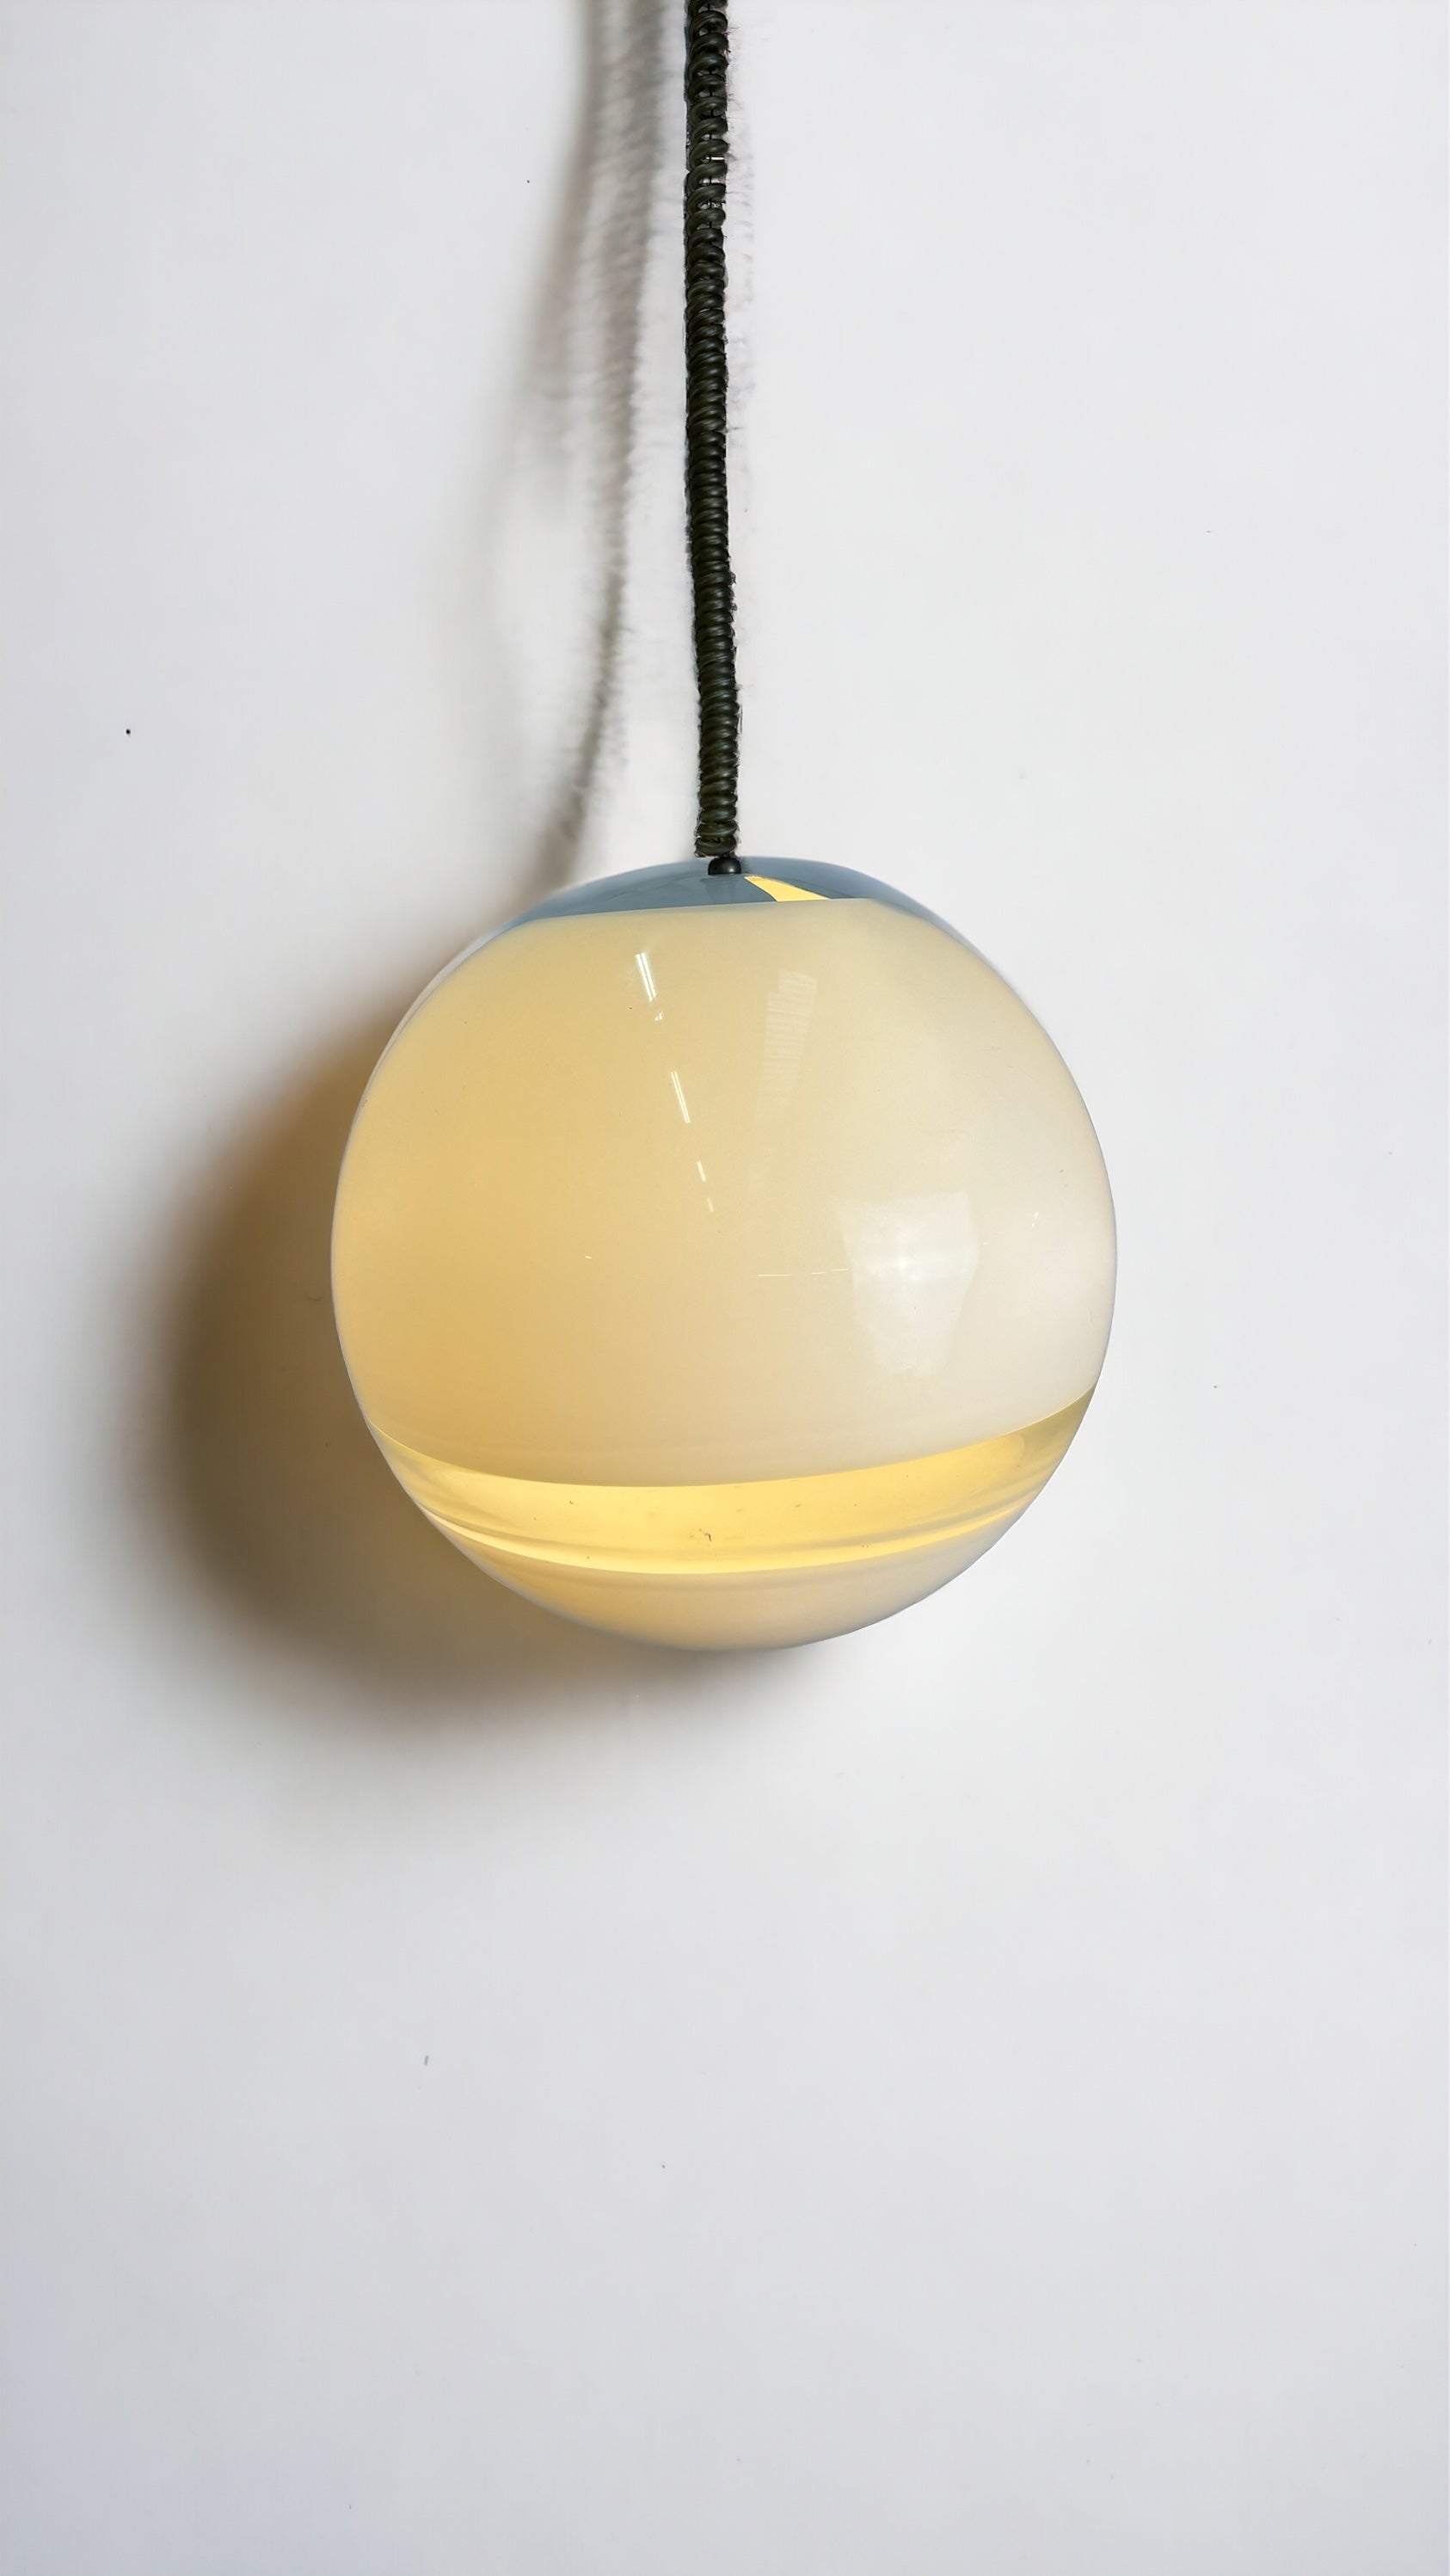 Pendant “Sphere” Lamp designed by Roberto Pamio for Leucos